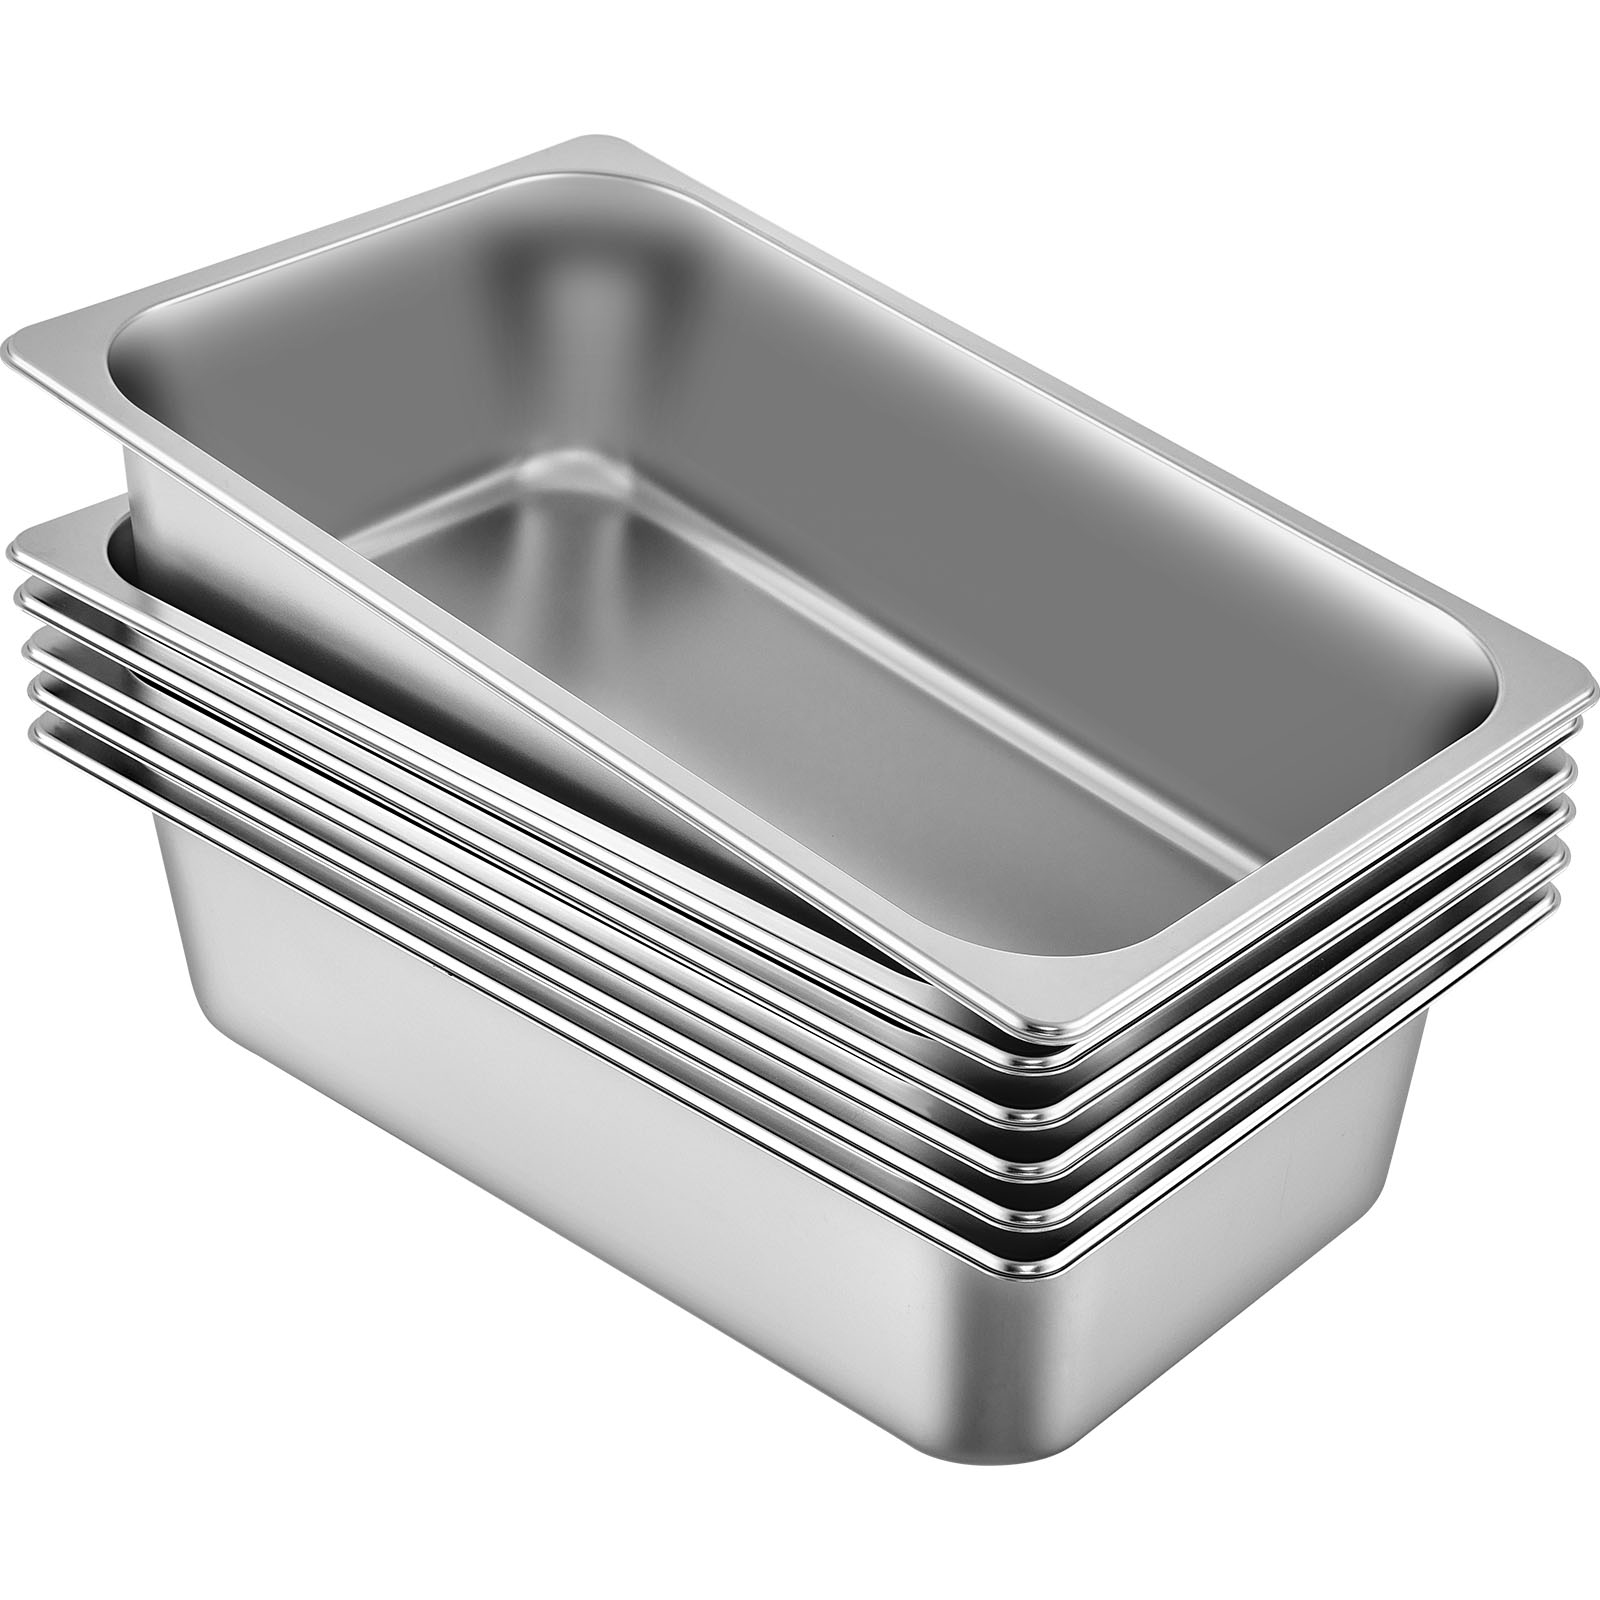 2 PACK Full Size 6" Deep Stainless Steel Steam Prep Table Hotel Buffet Food Pan 